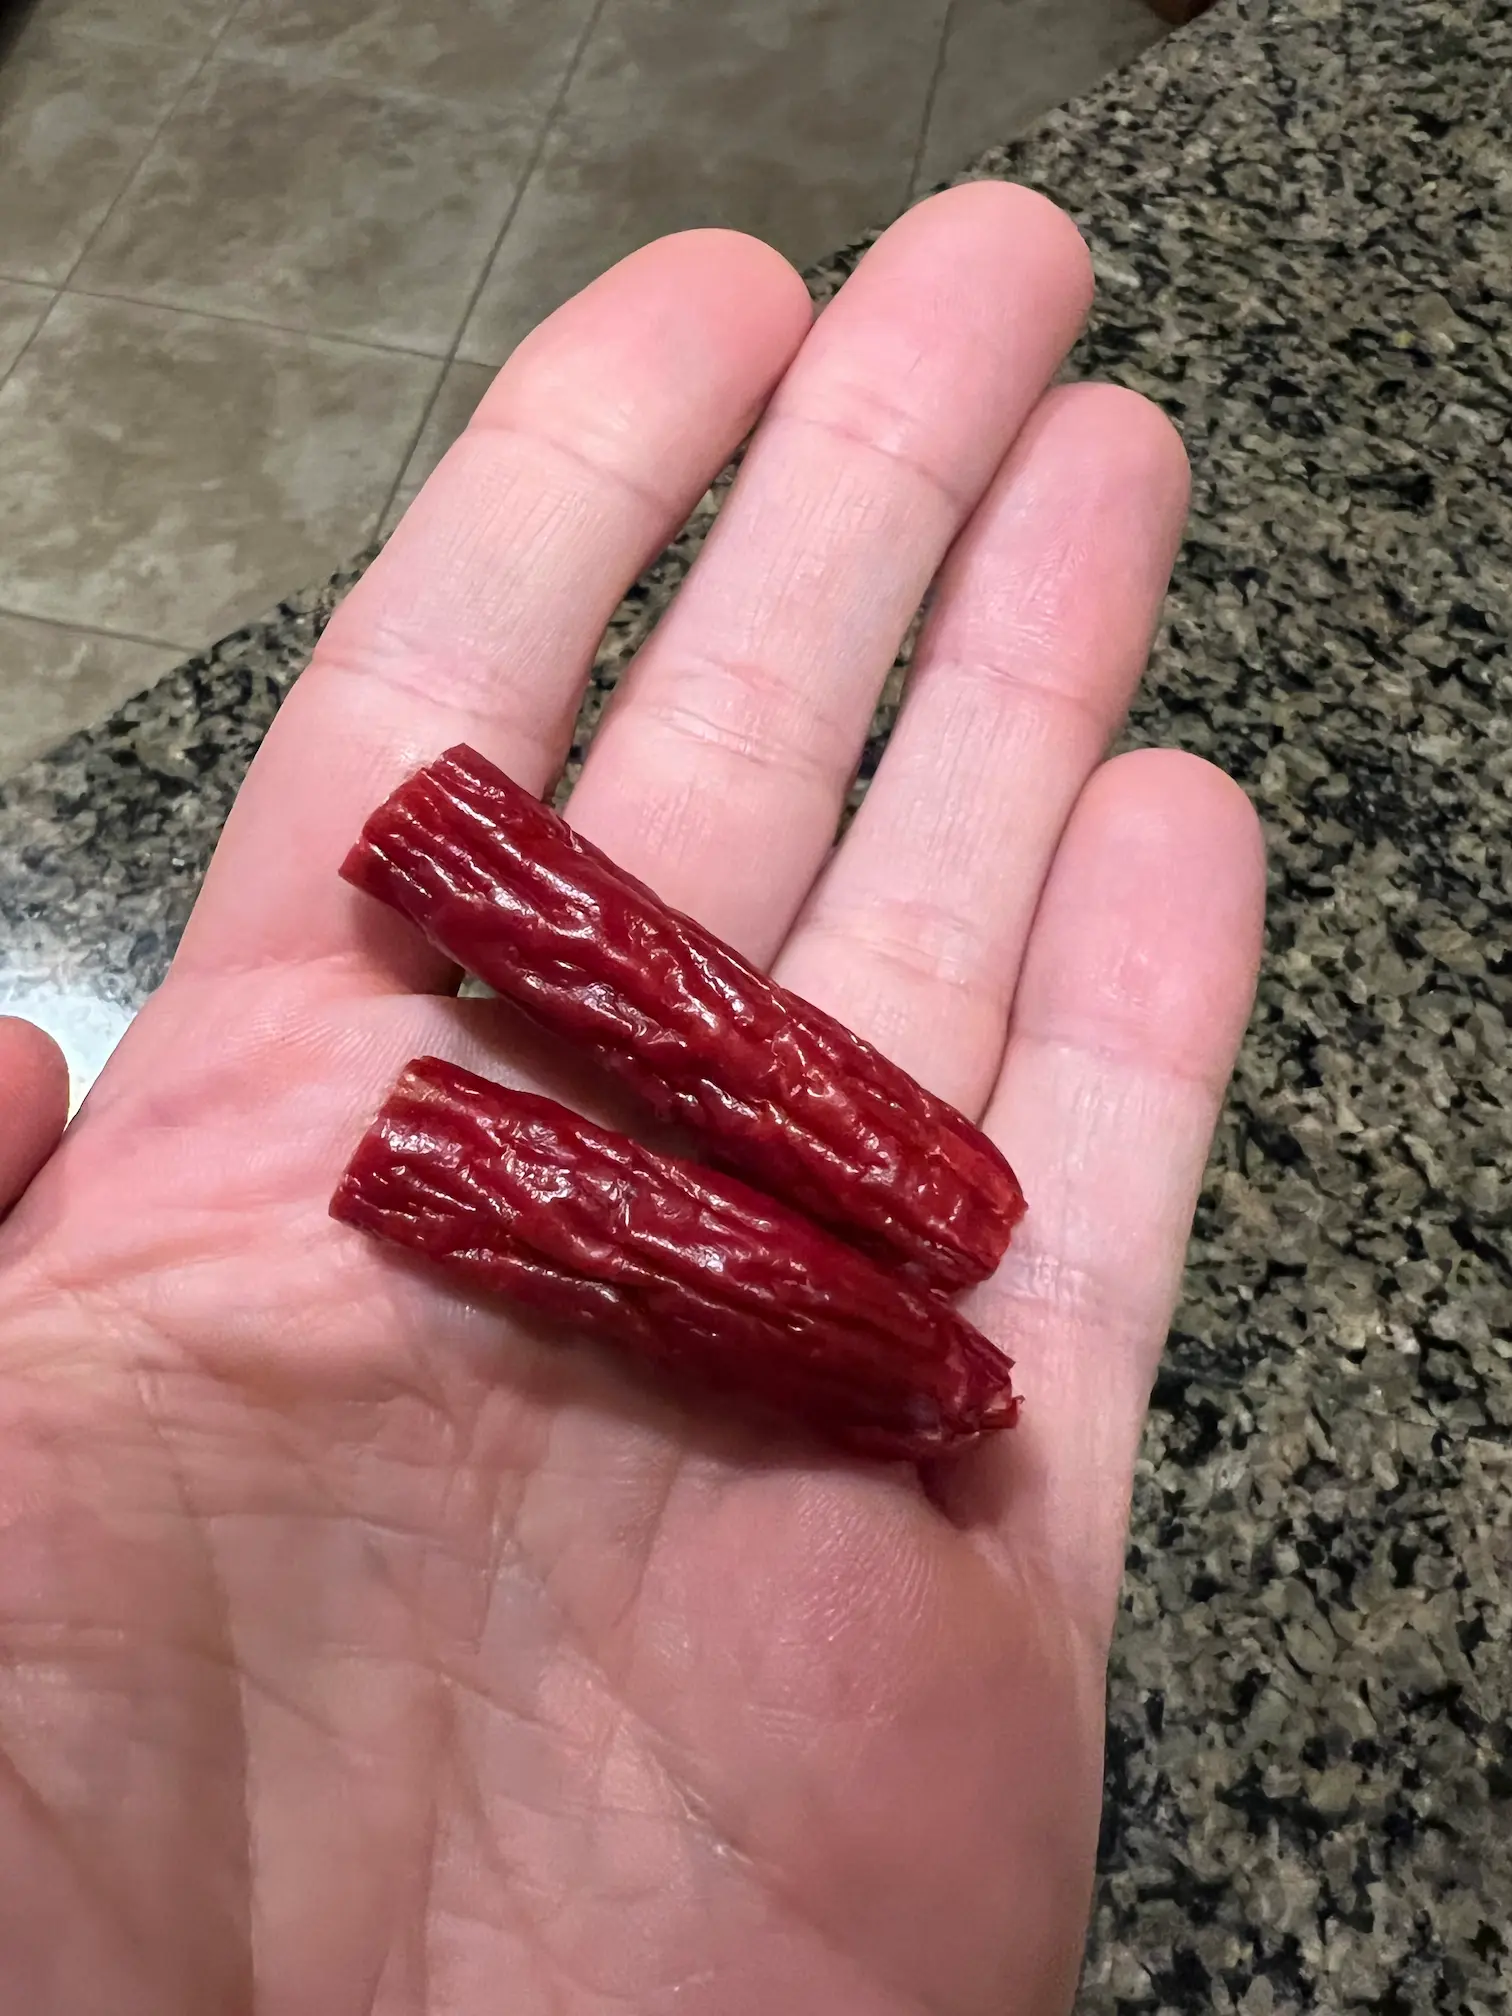 Pre-portioned beef jerky sticks that I kept in my top-tube bag.